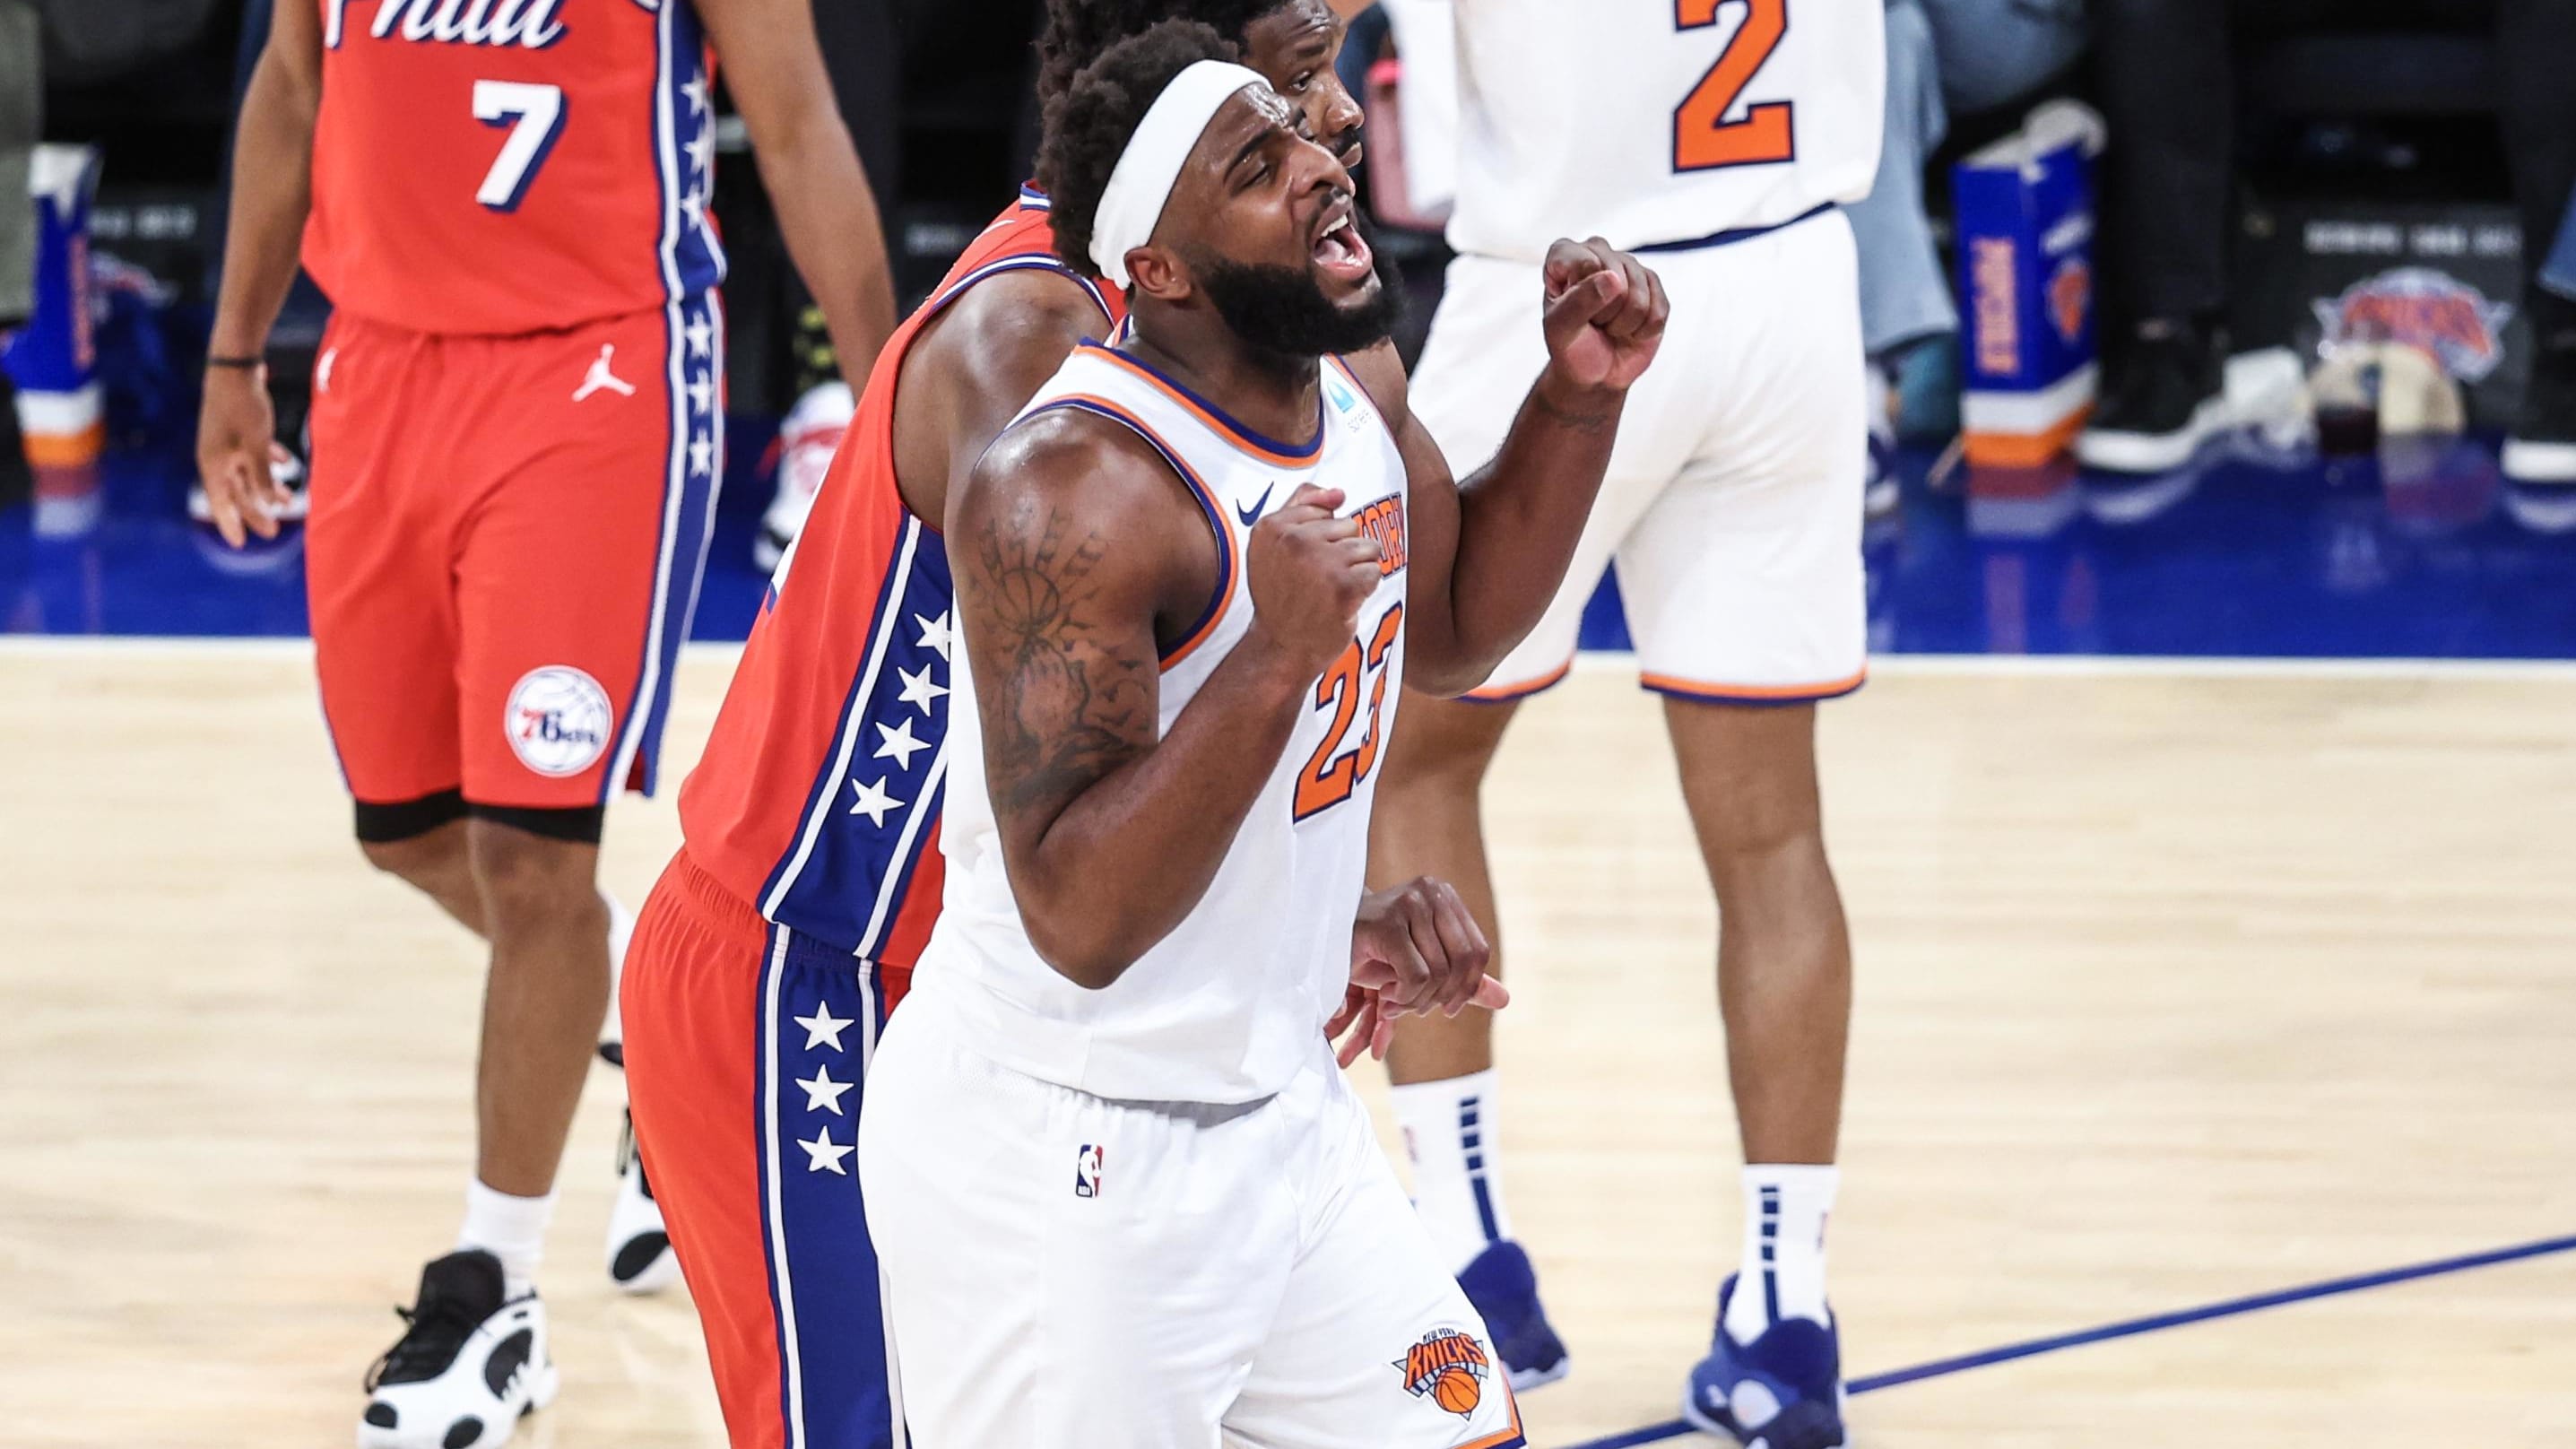 Embiid's 50-Point Surge Cuts Knicks' Lead, Controversy Erupts in Game 3